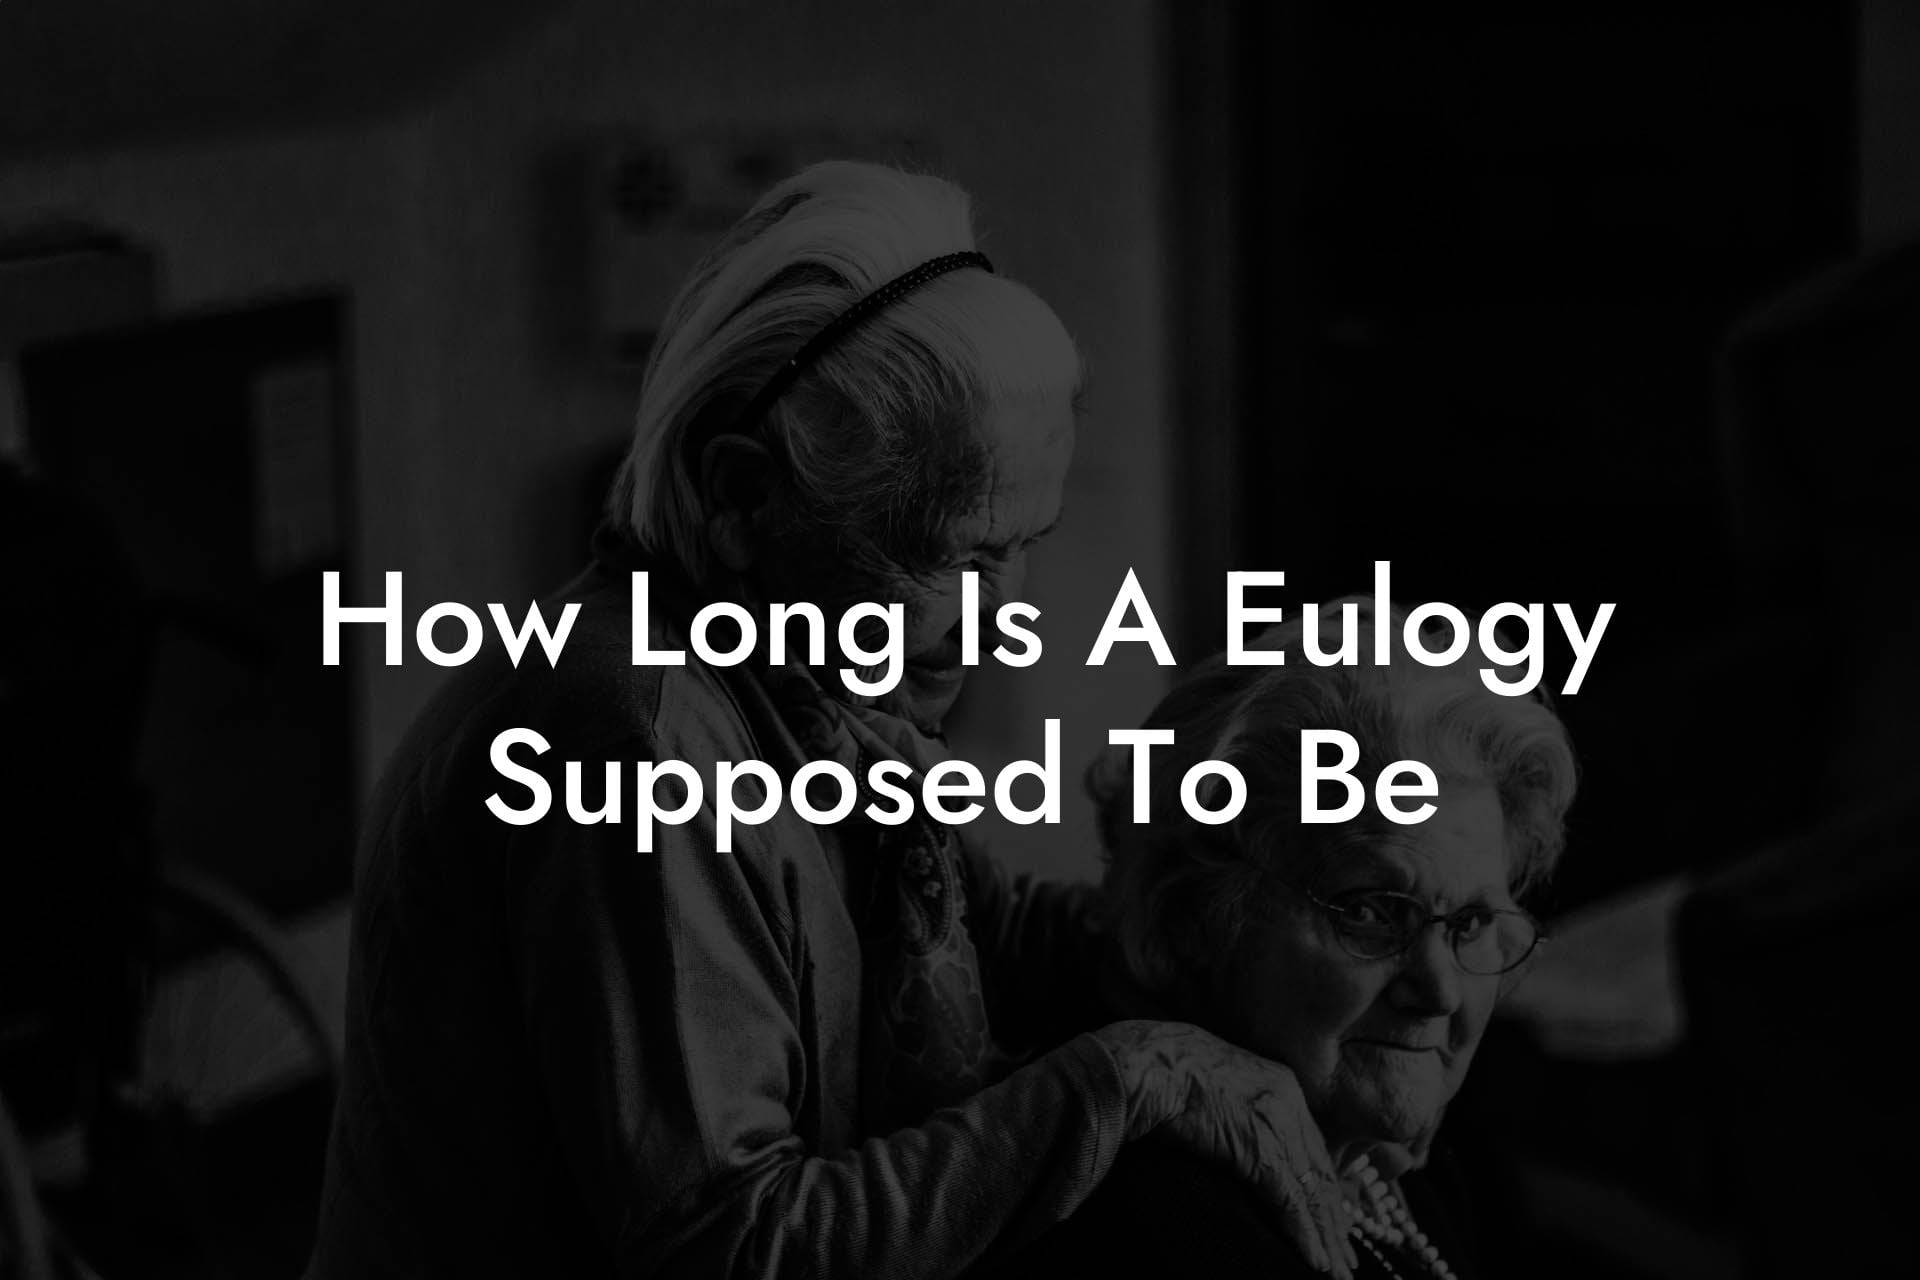 How Long Is A Eulogy Supposed To Be?